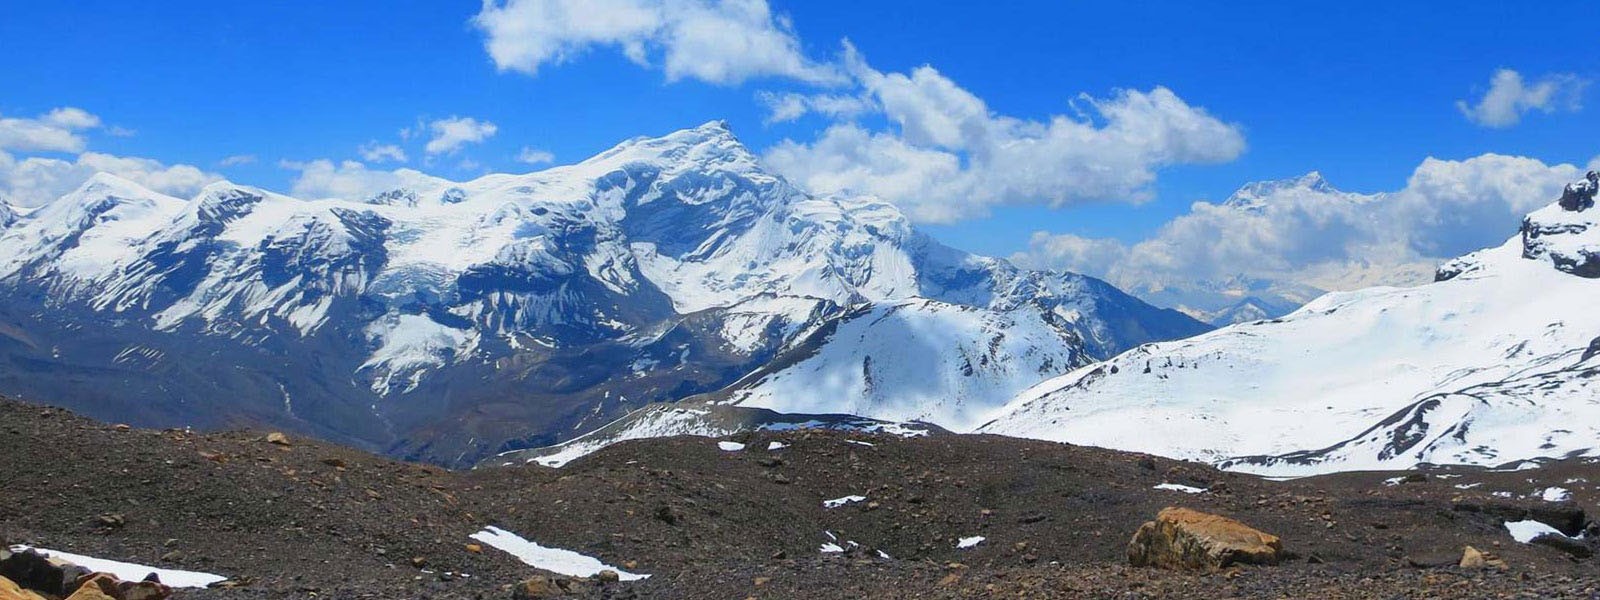 Chulu West Peak View from Thorung-La High Pass